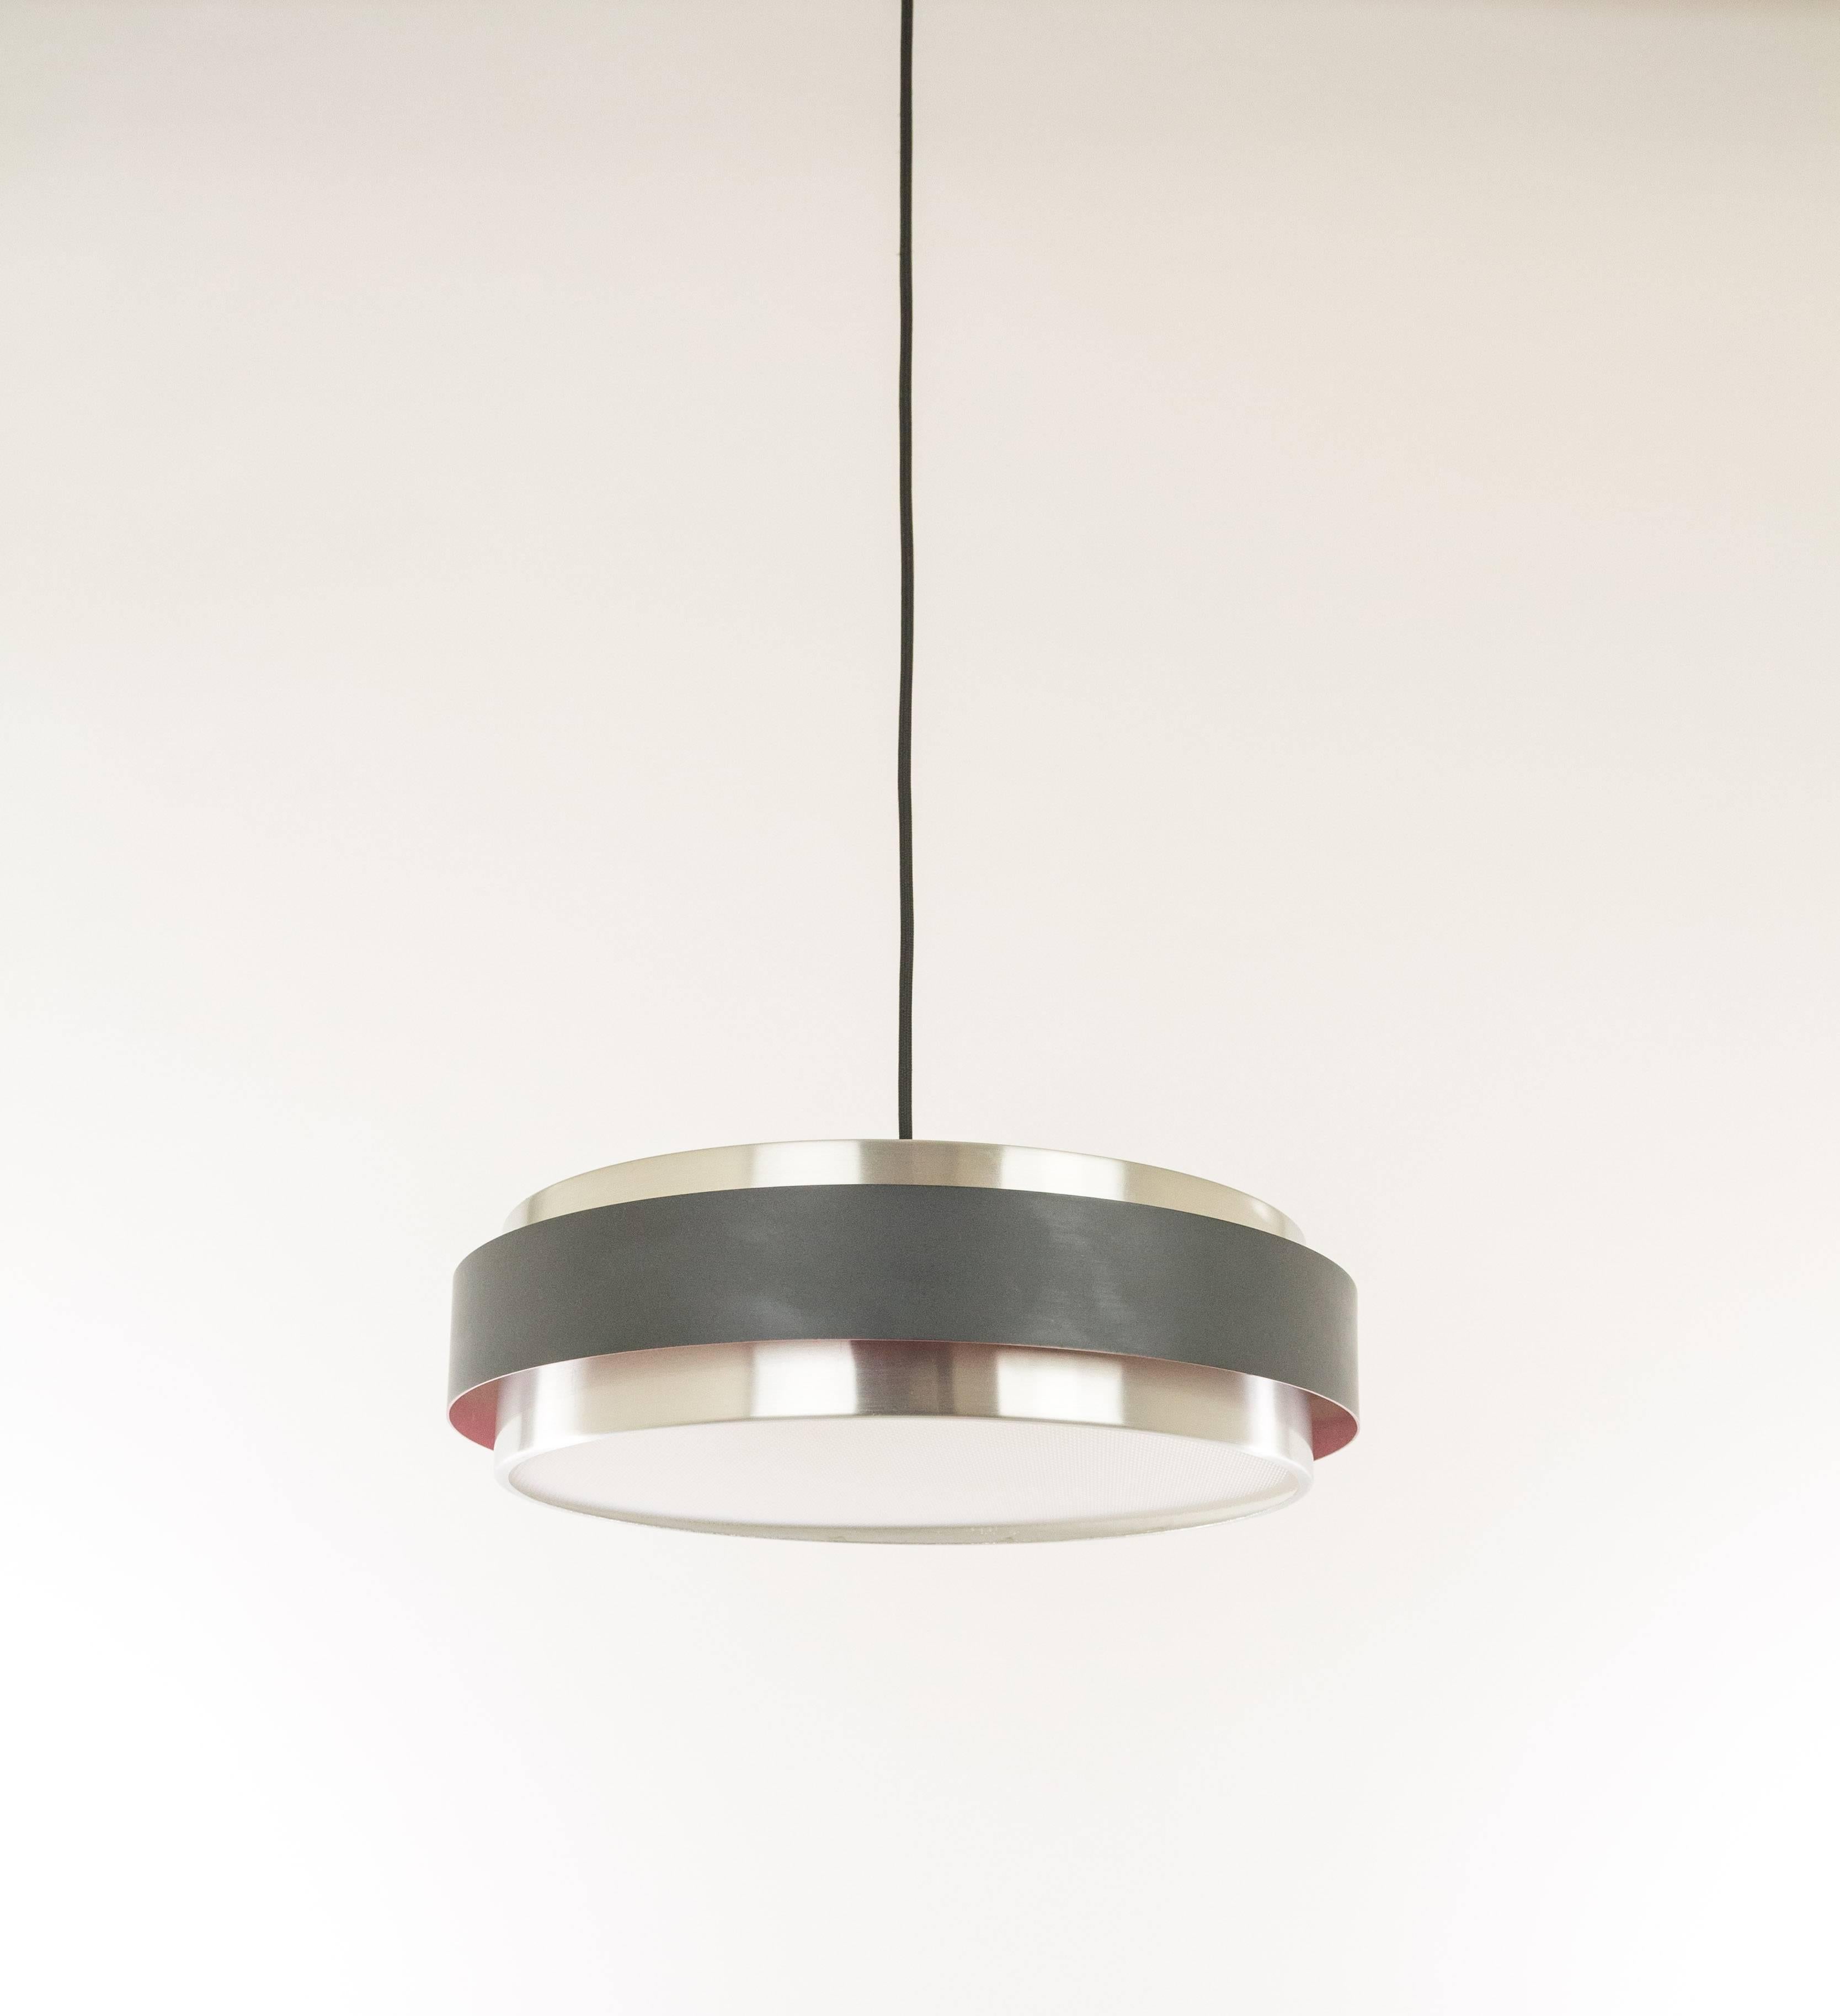 Sera is a 1960s pendant designed by Jo Hammerborg for Fog & Mørup. The lampshade is made of three brushed aluminium disks. The top and bottom ones are silver coloured and the central circular shade is lacquered black on the outside and purple on the